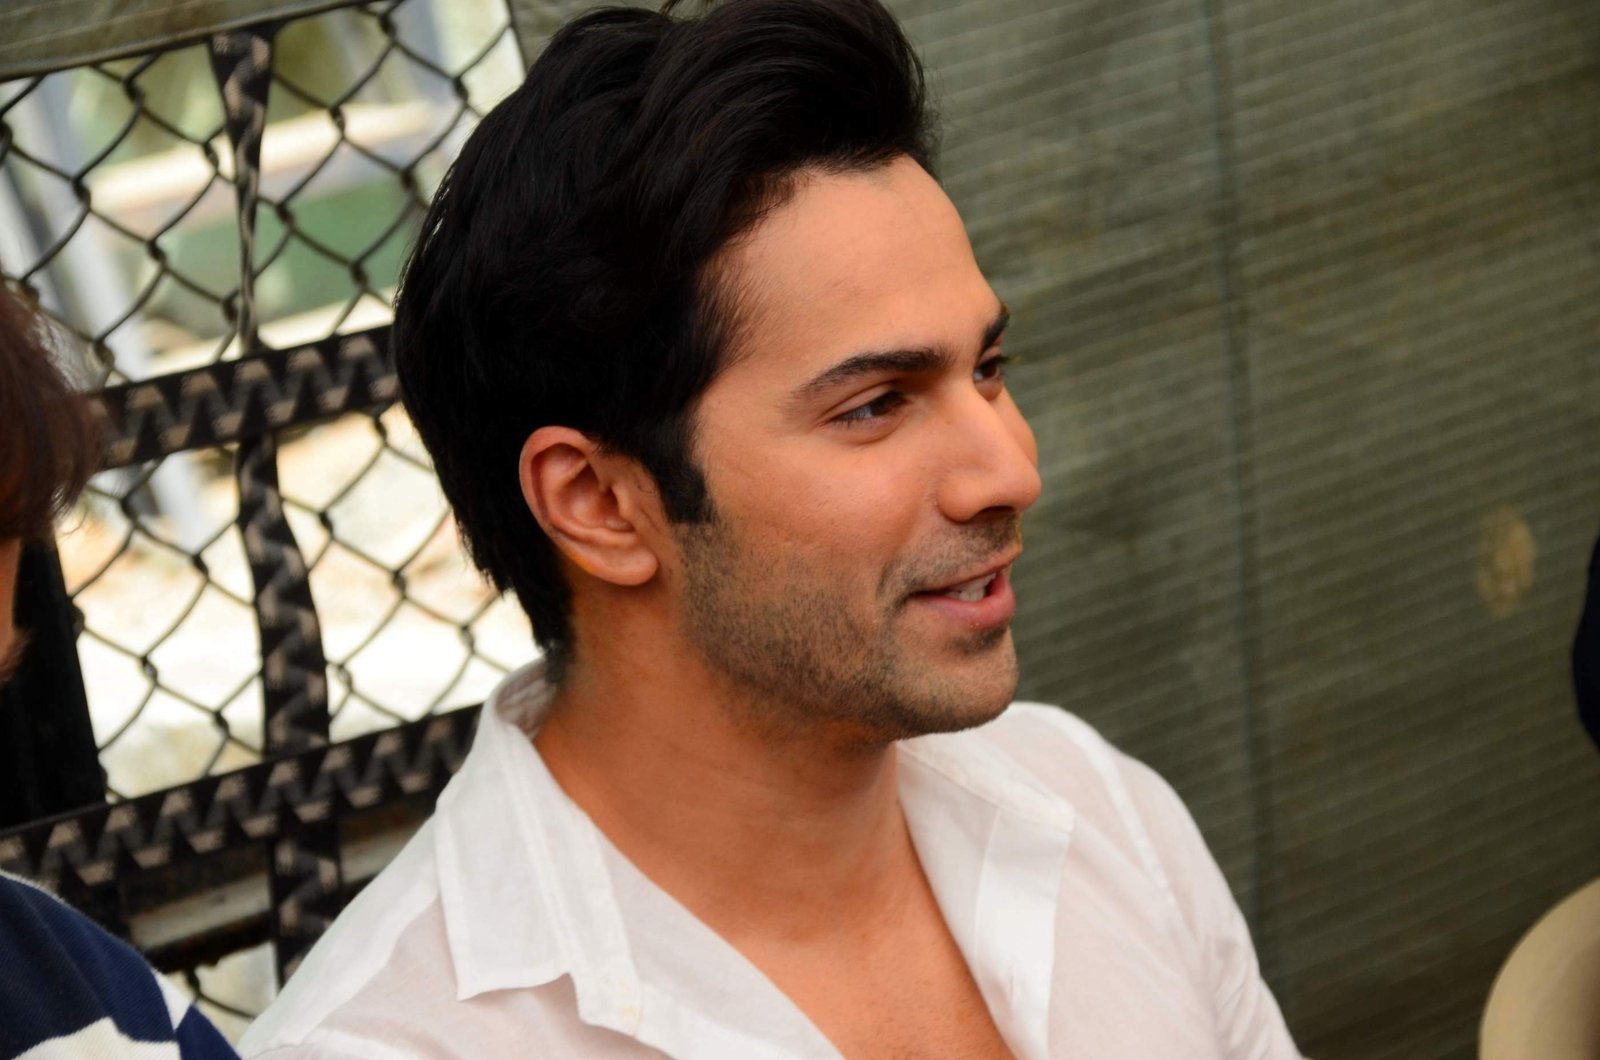 Varun Dhawan - Announcement of film Judwaa 2 Images | Picture 1470542